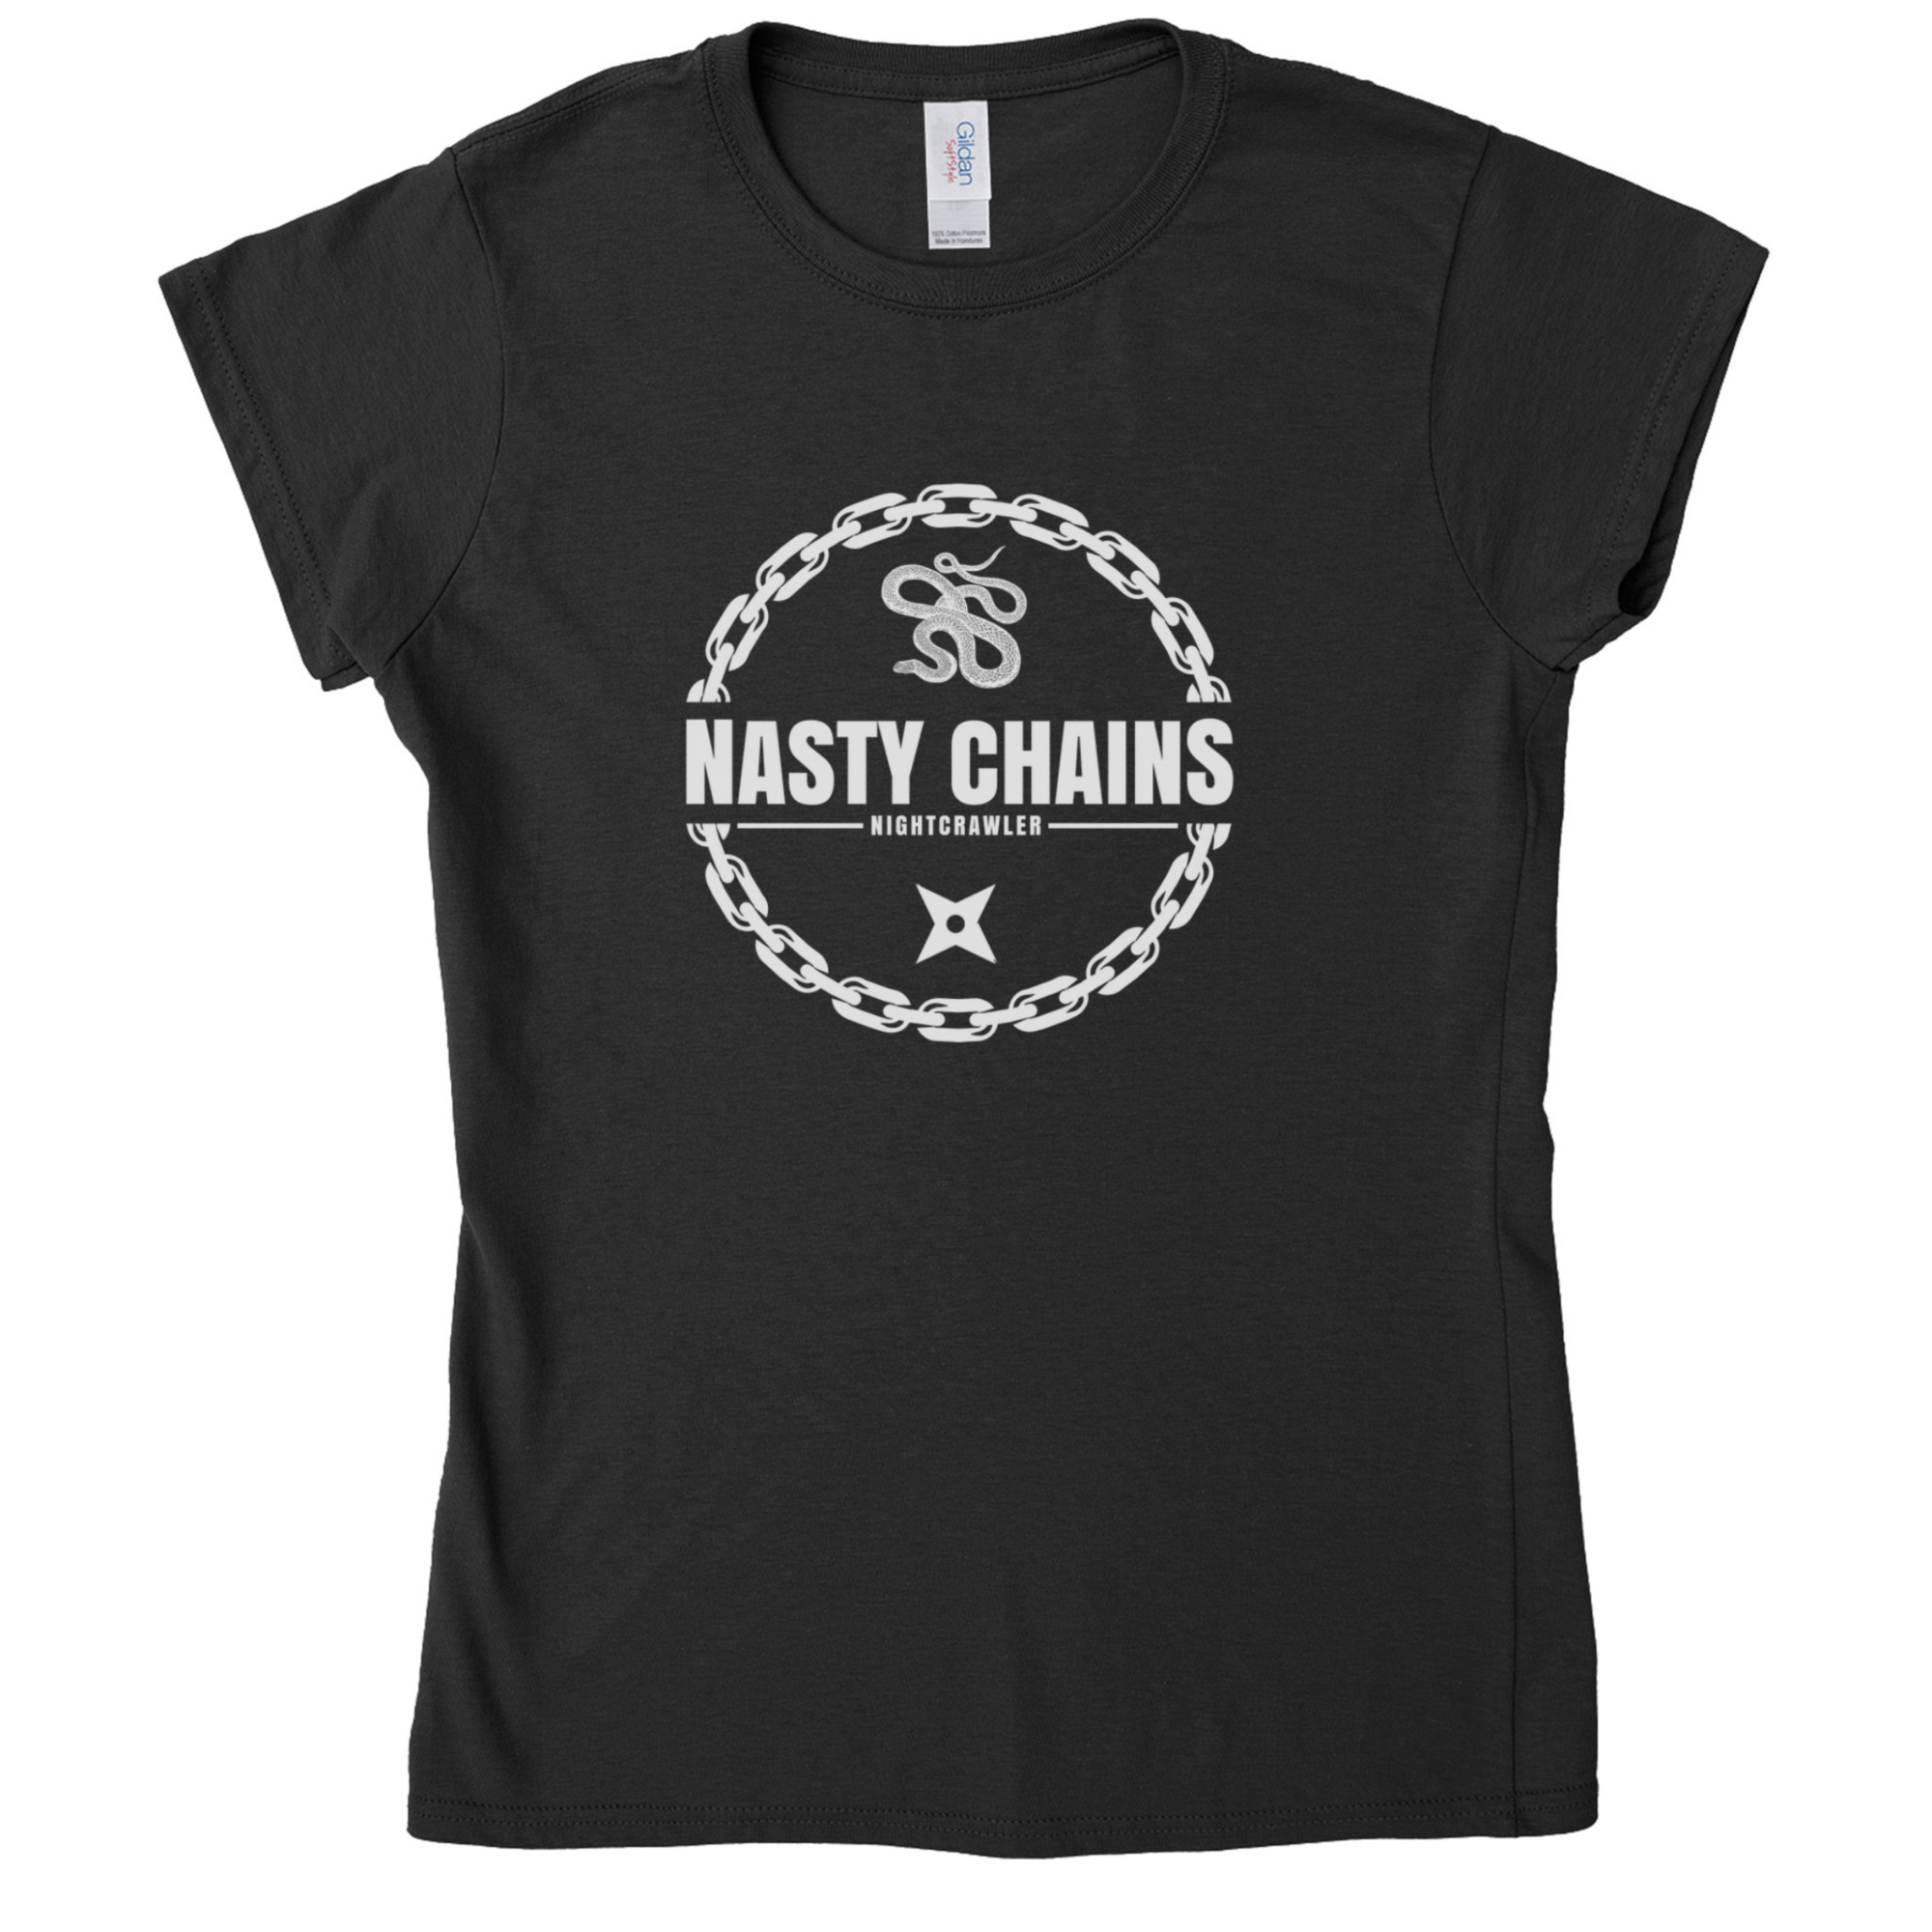 Nasty Chains - Women's Fit T-Shirt